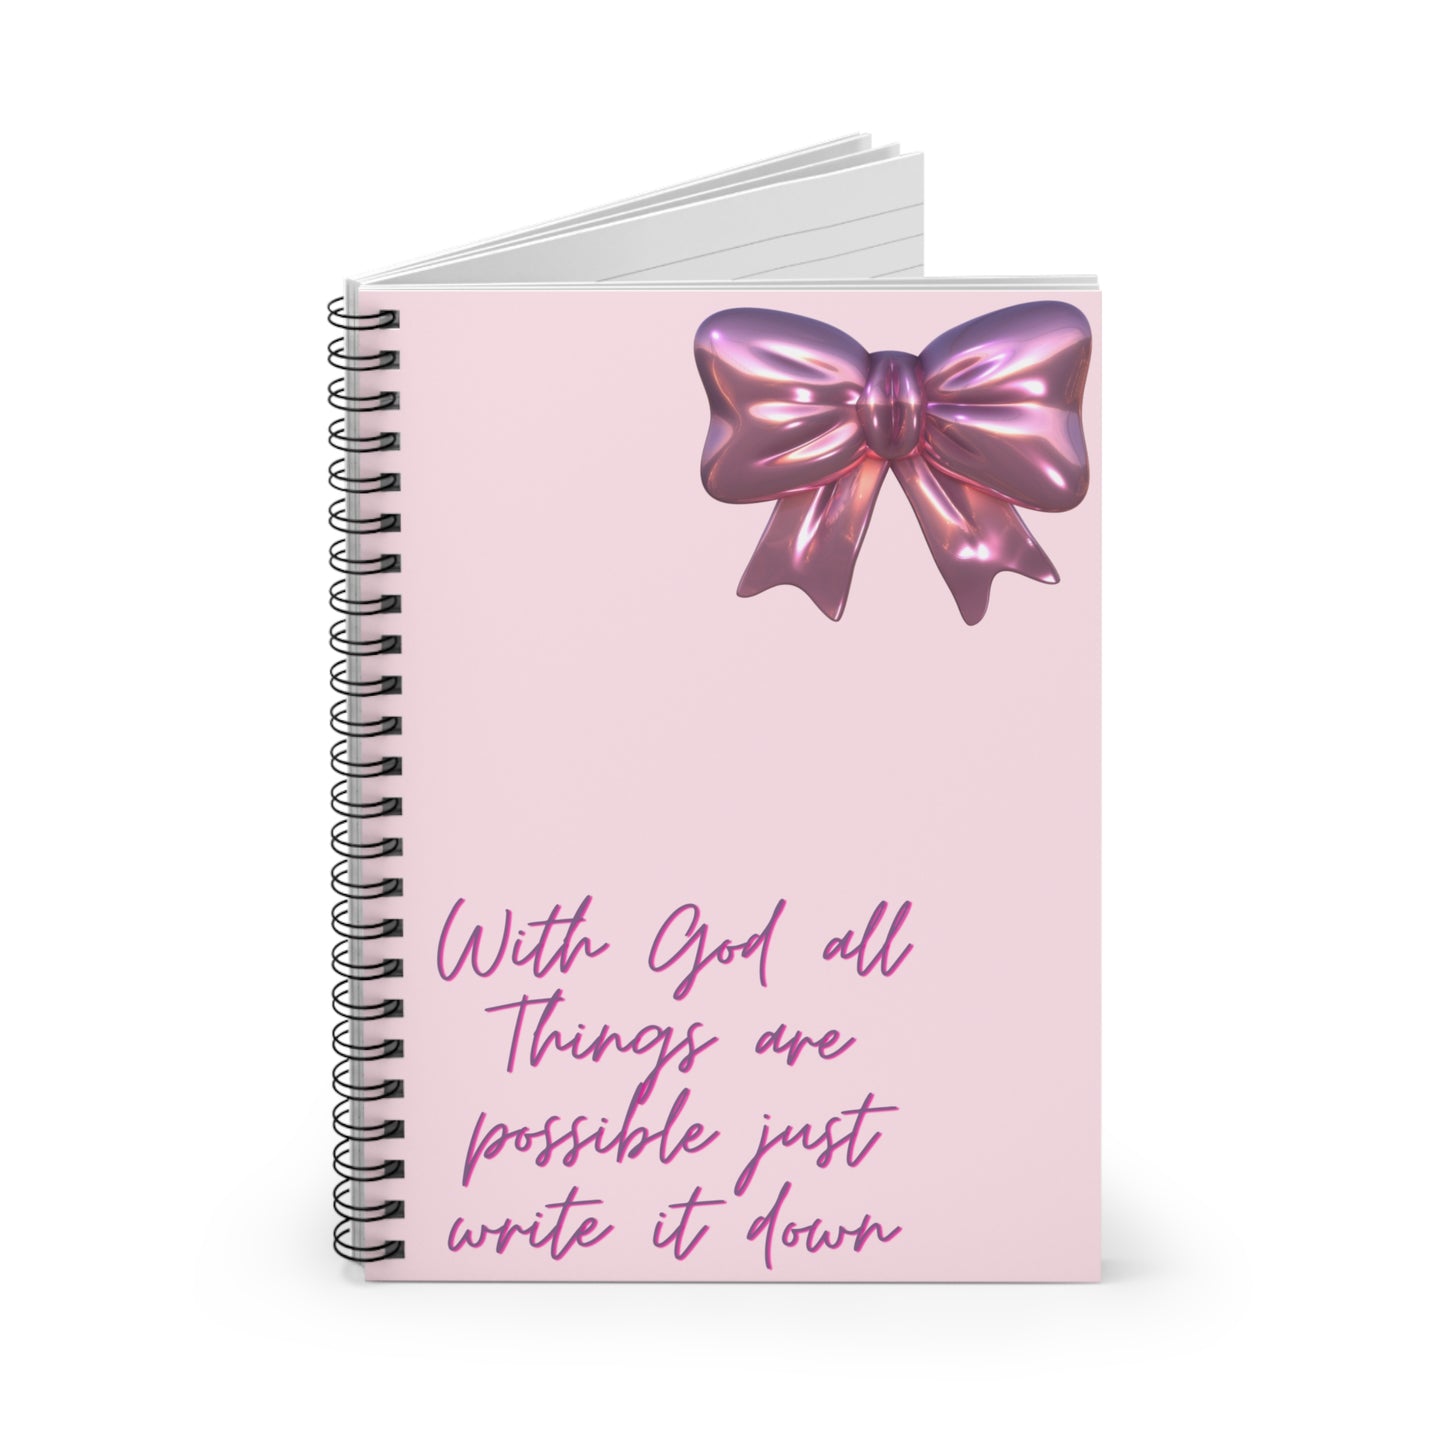 All Things Are Possible Spiral Notebook - Ruled Line